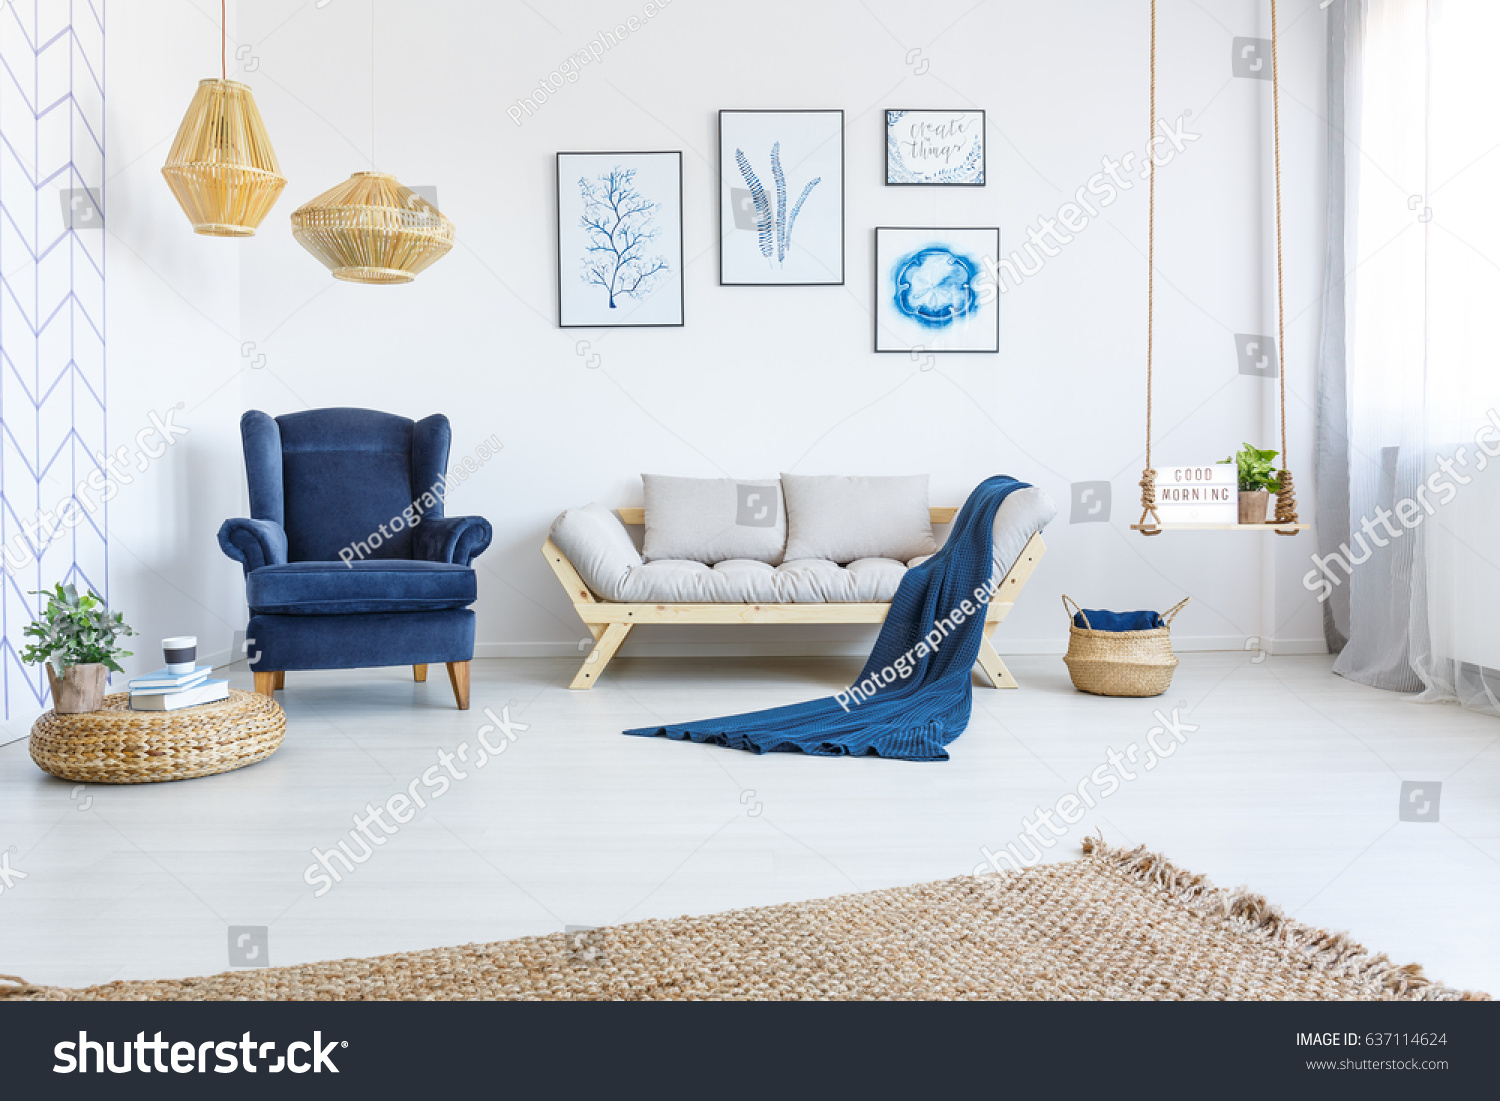 White home interior with sofa, armchair, posters, lamps and rug #637114624